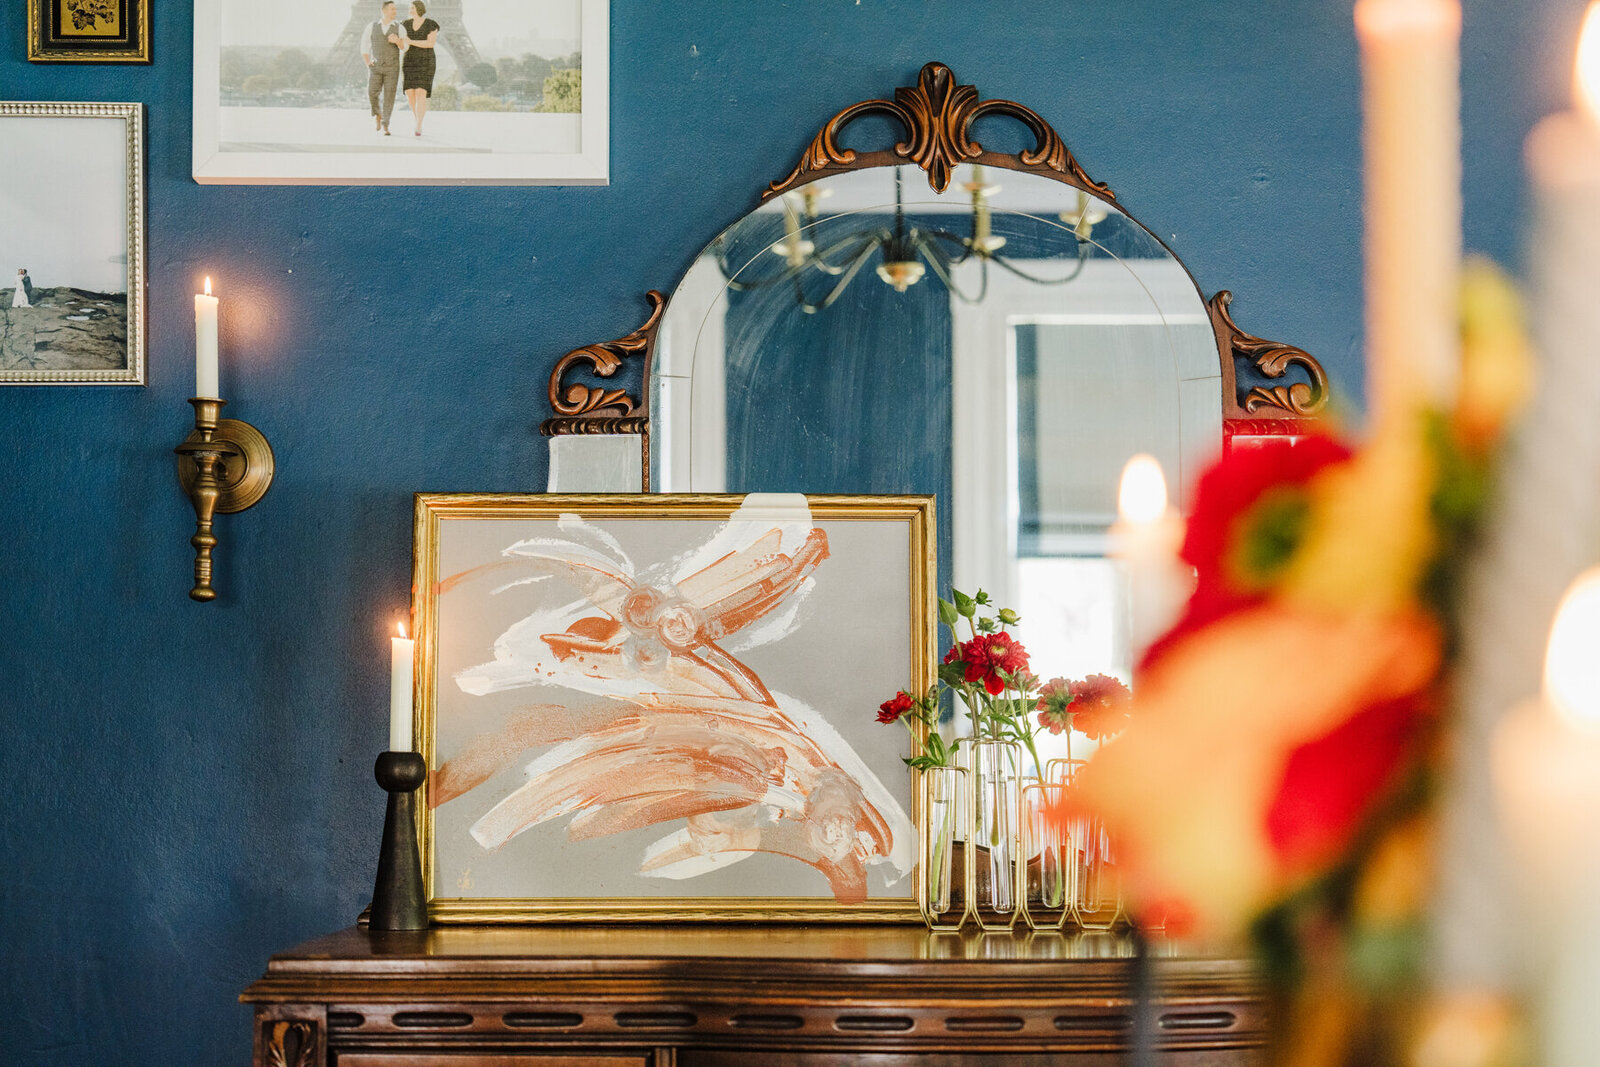 a large framed piece of art is displayed on a mirrored chest alongside candles and flowers